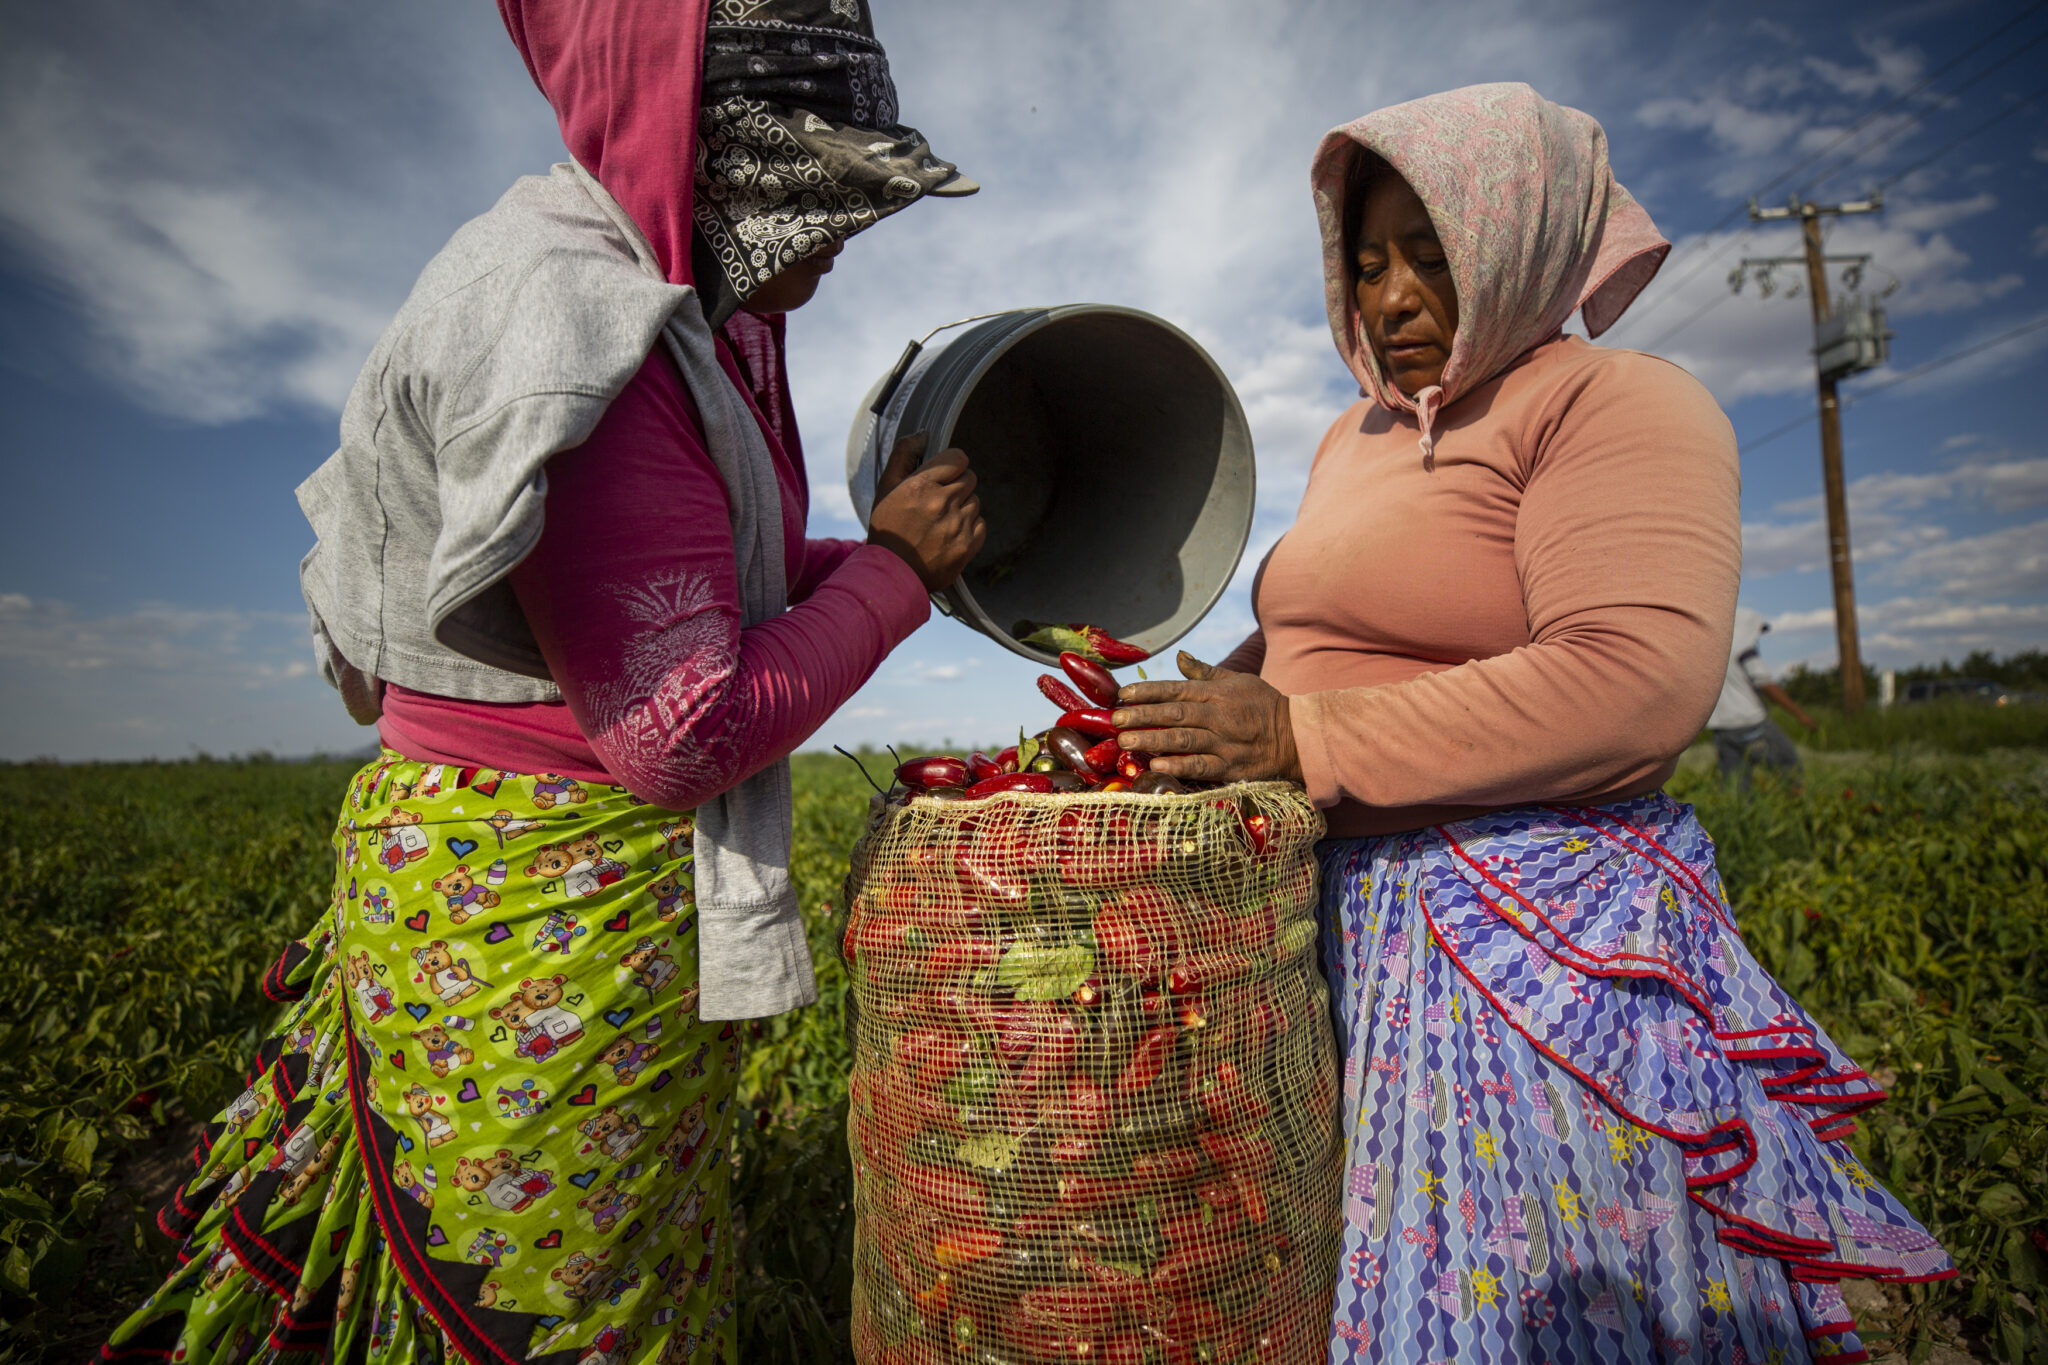 Two indigenous Mexican women in colorful clothing and head scarves sort bright red peppers on a farm under a partly cloudy sky.